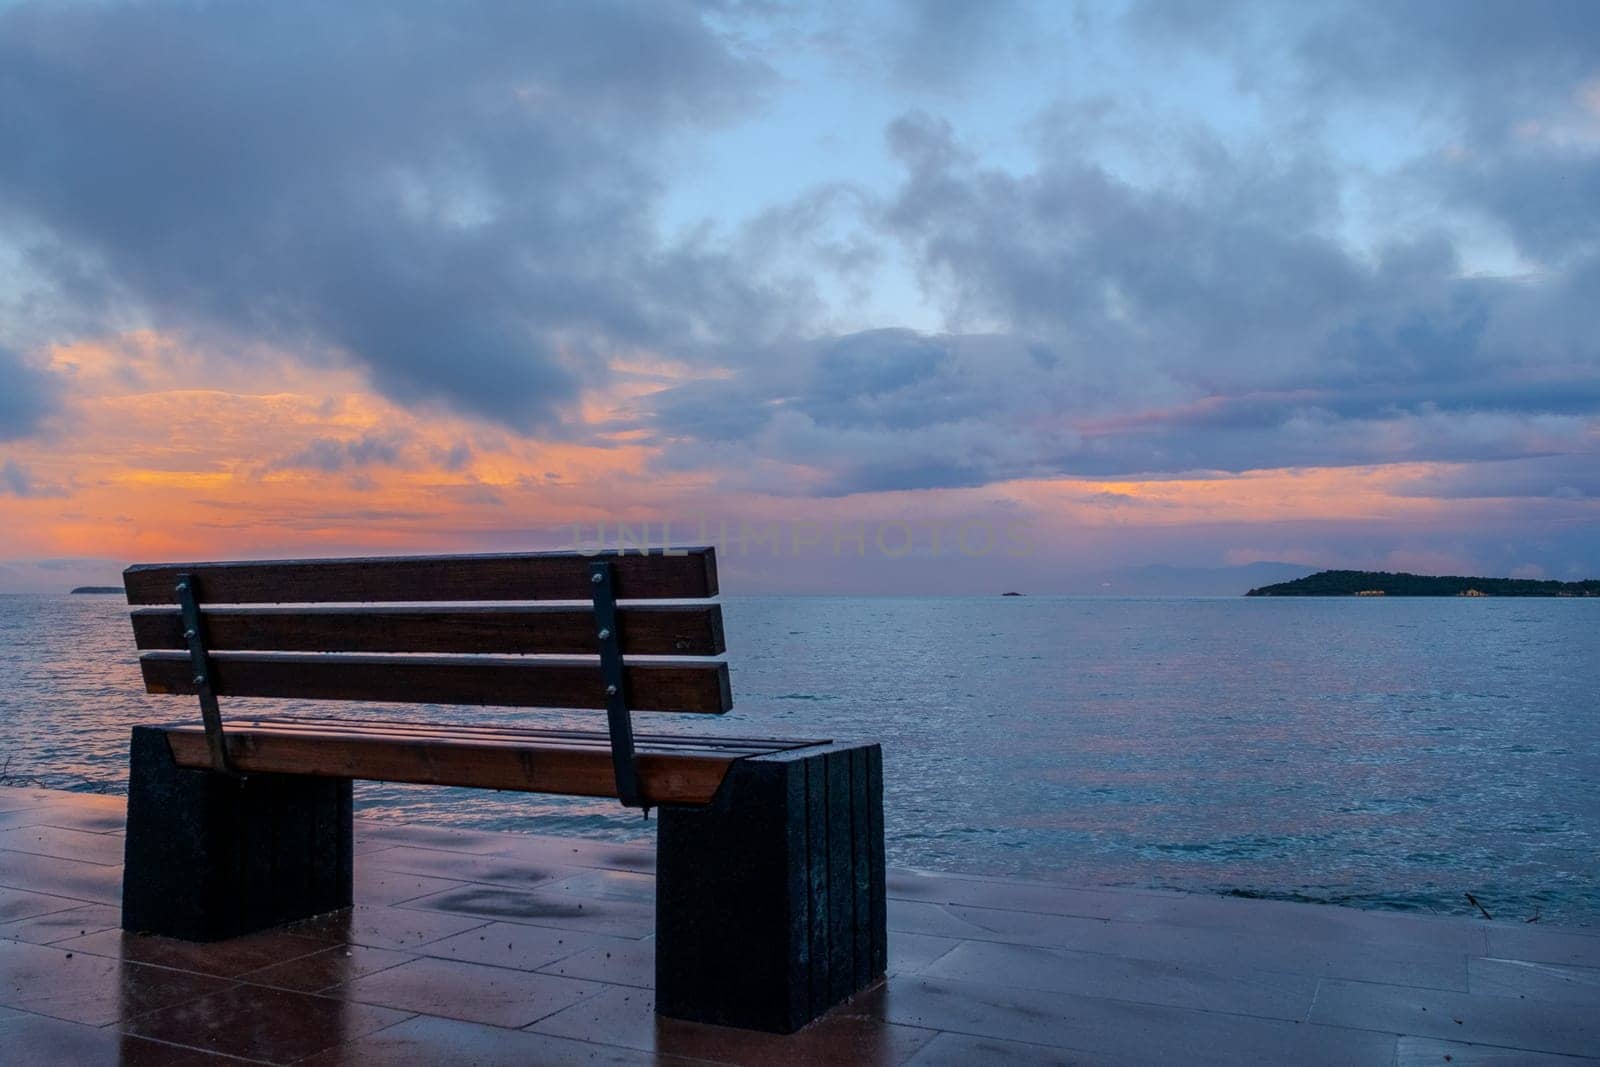 Wooden bench on dock by water at sunset, overlooking ocean by senkaya